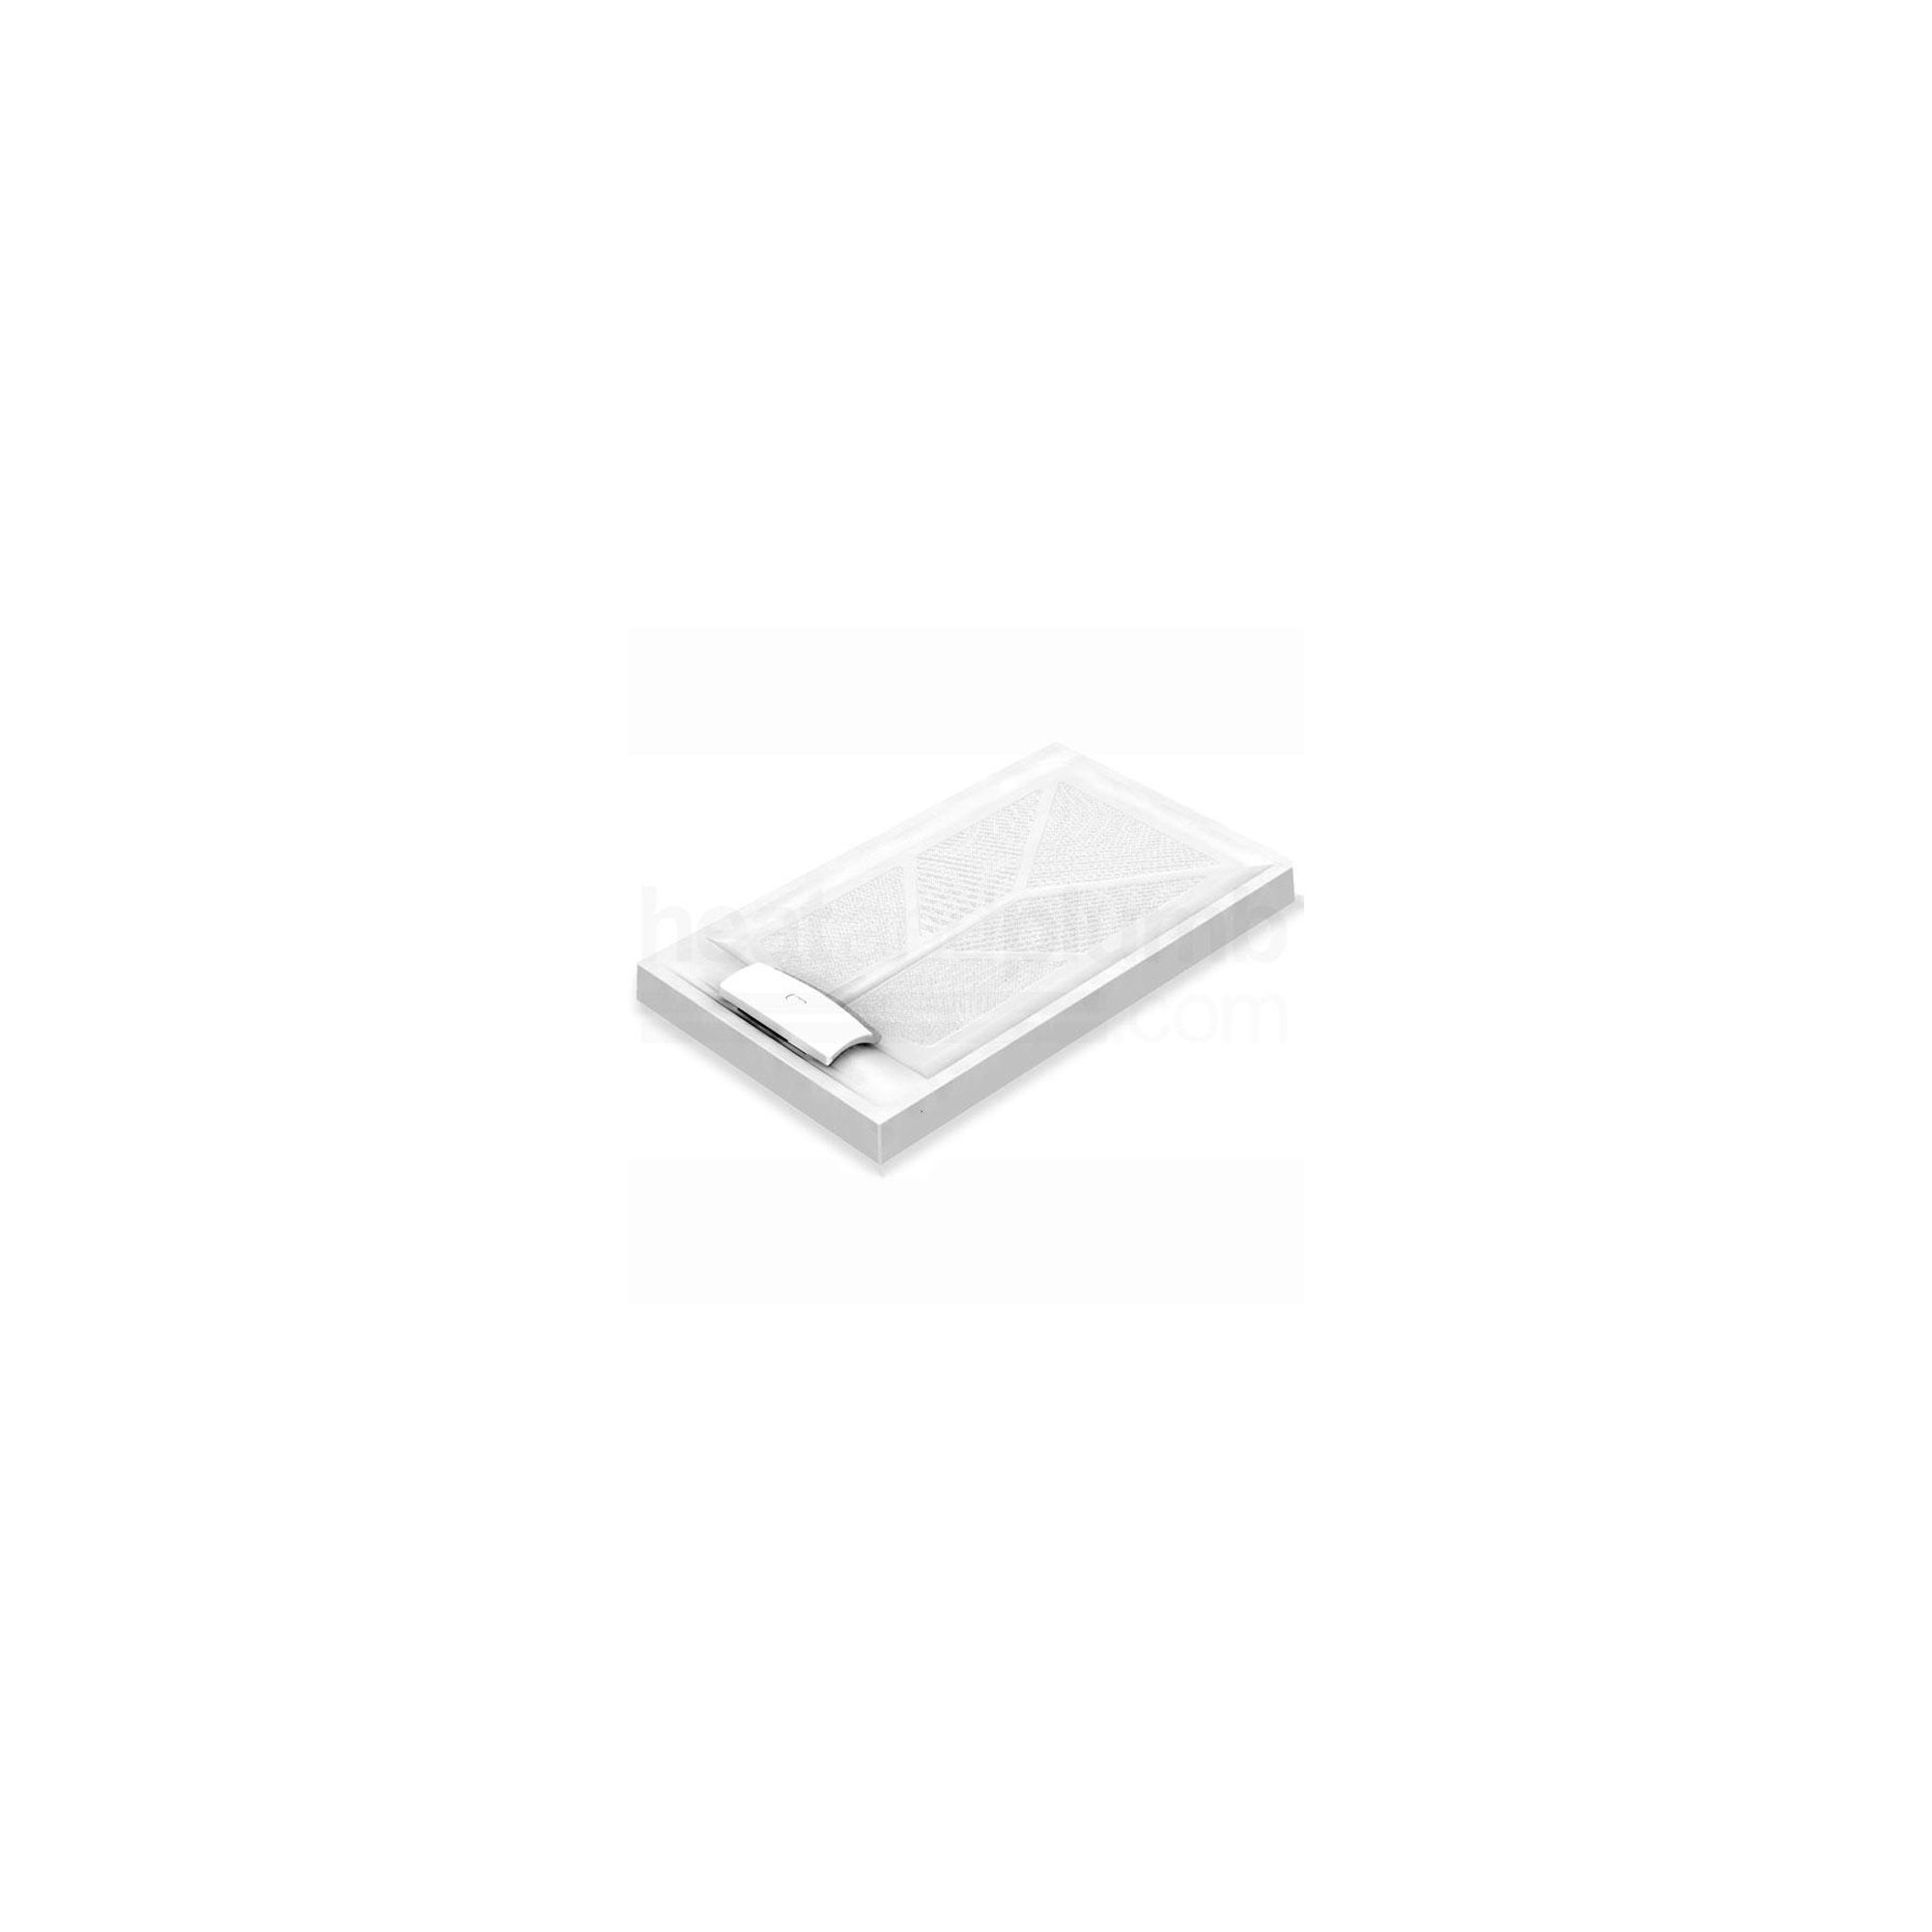 AKW Sulby Rectangular Shower Tray 1300mm x 820mm at Tesco Direct